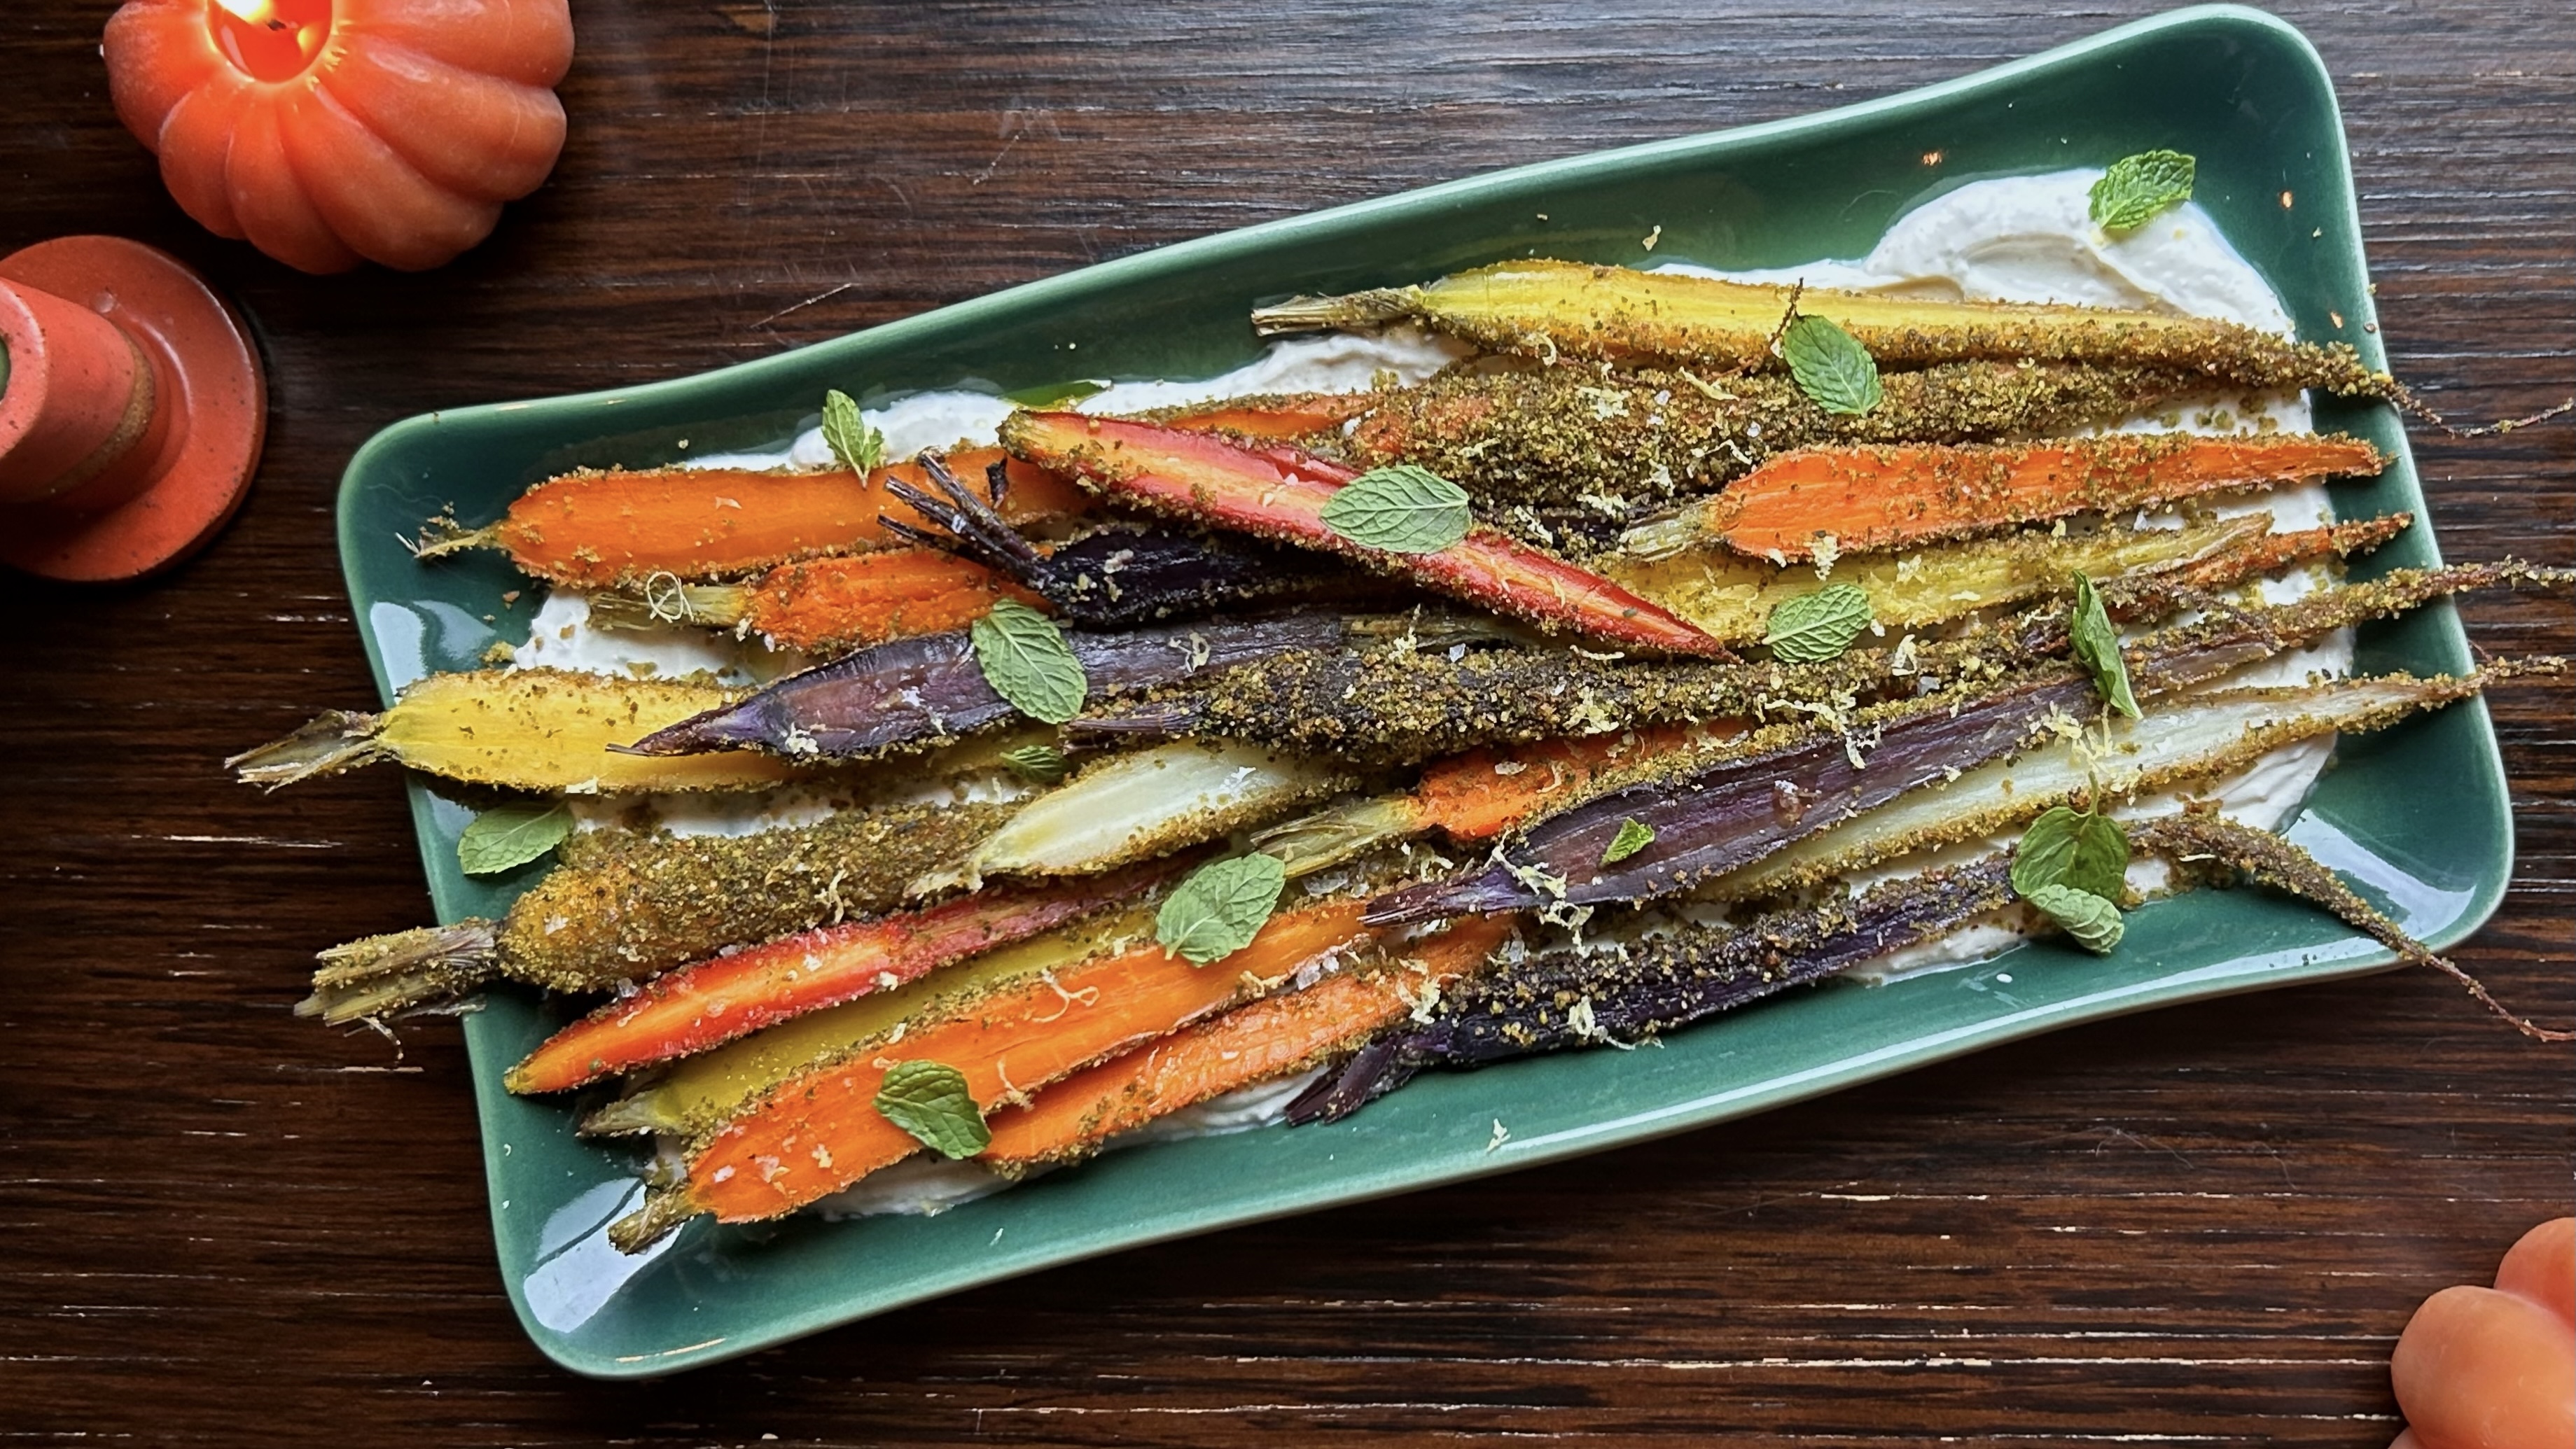 Pistachio Herb Crusted Carrots Over Spiced Yogurt